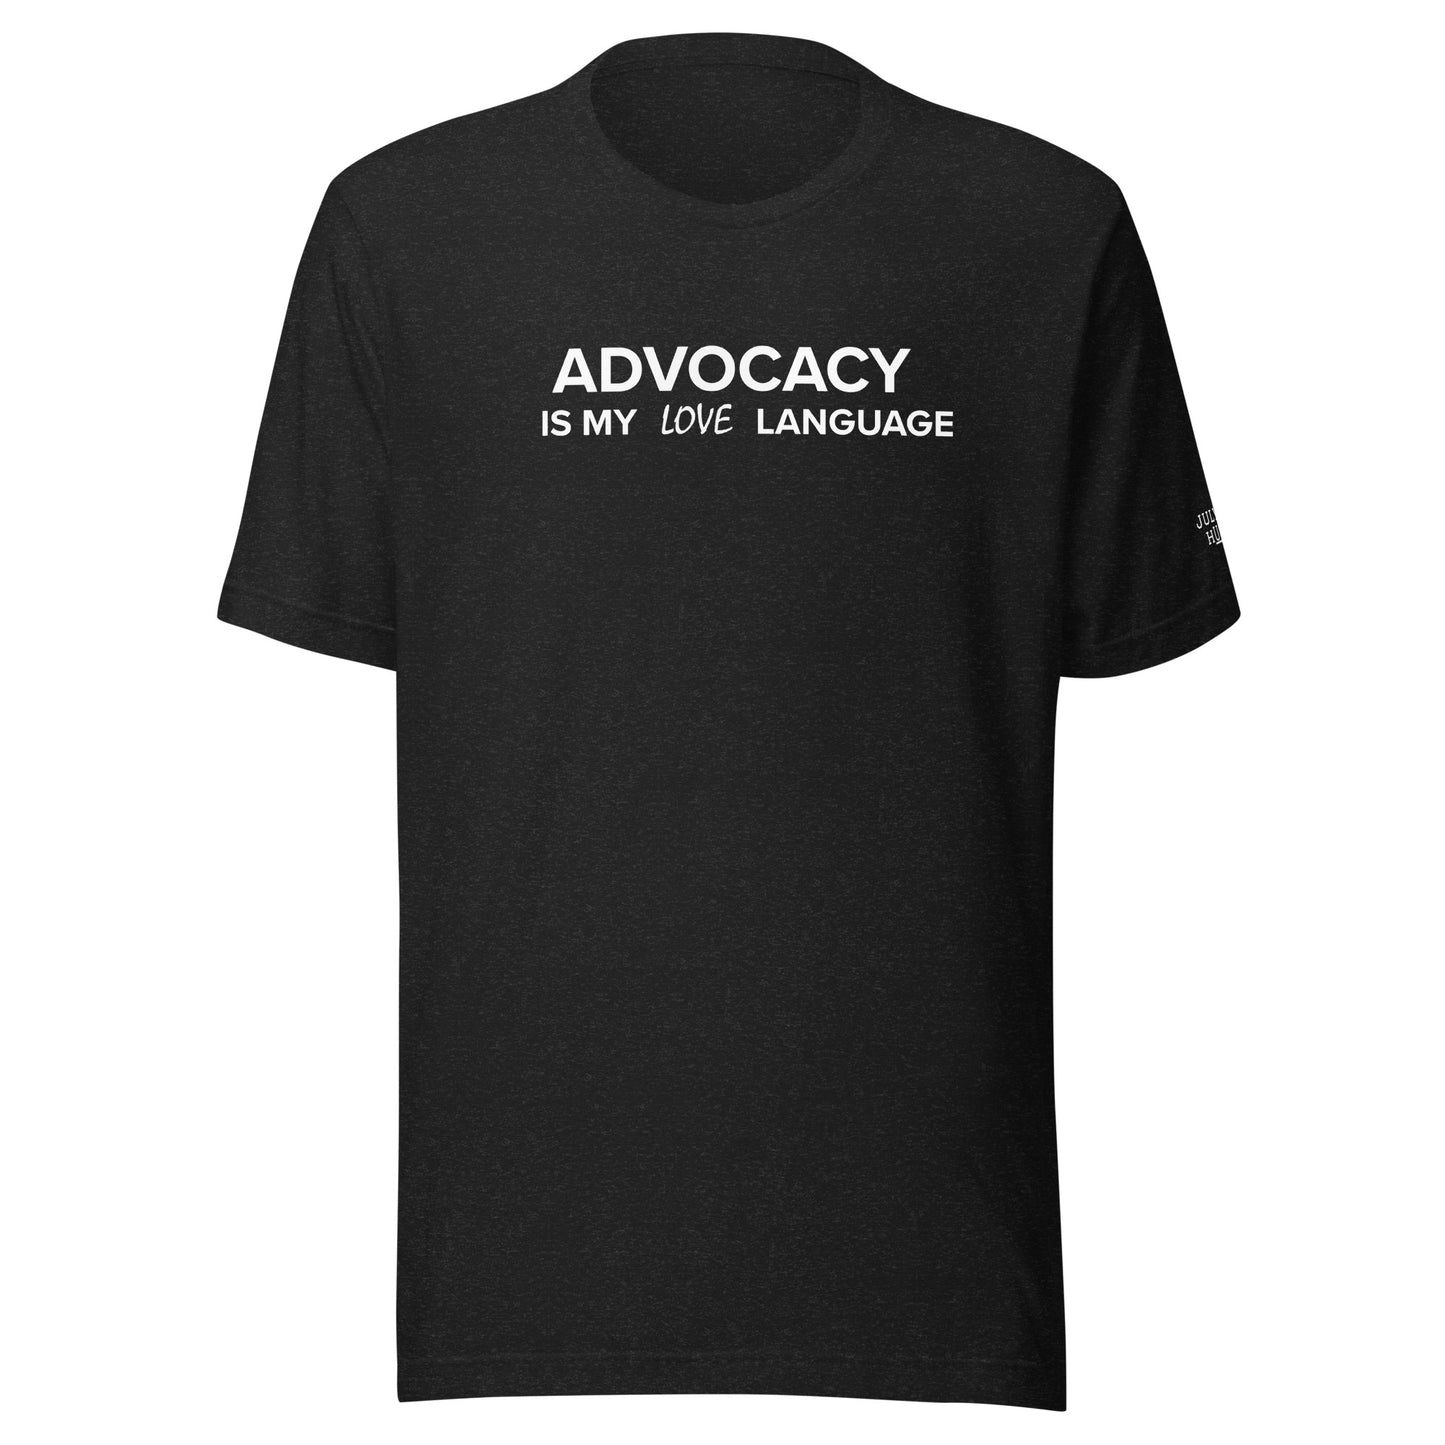 Sometimes It Is Black and White Advocacy Tee